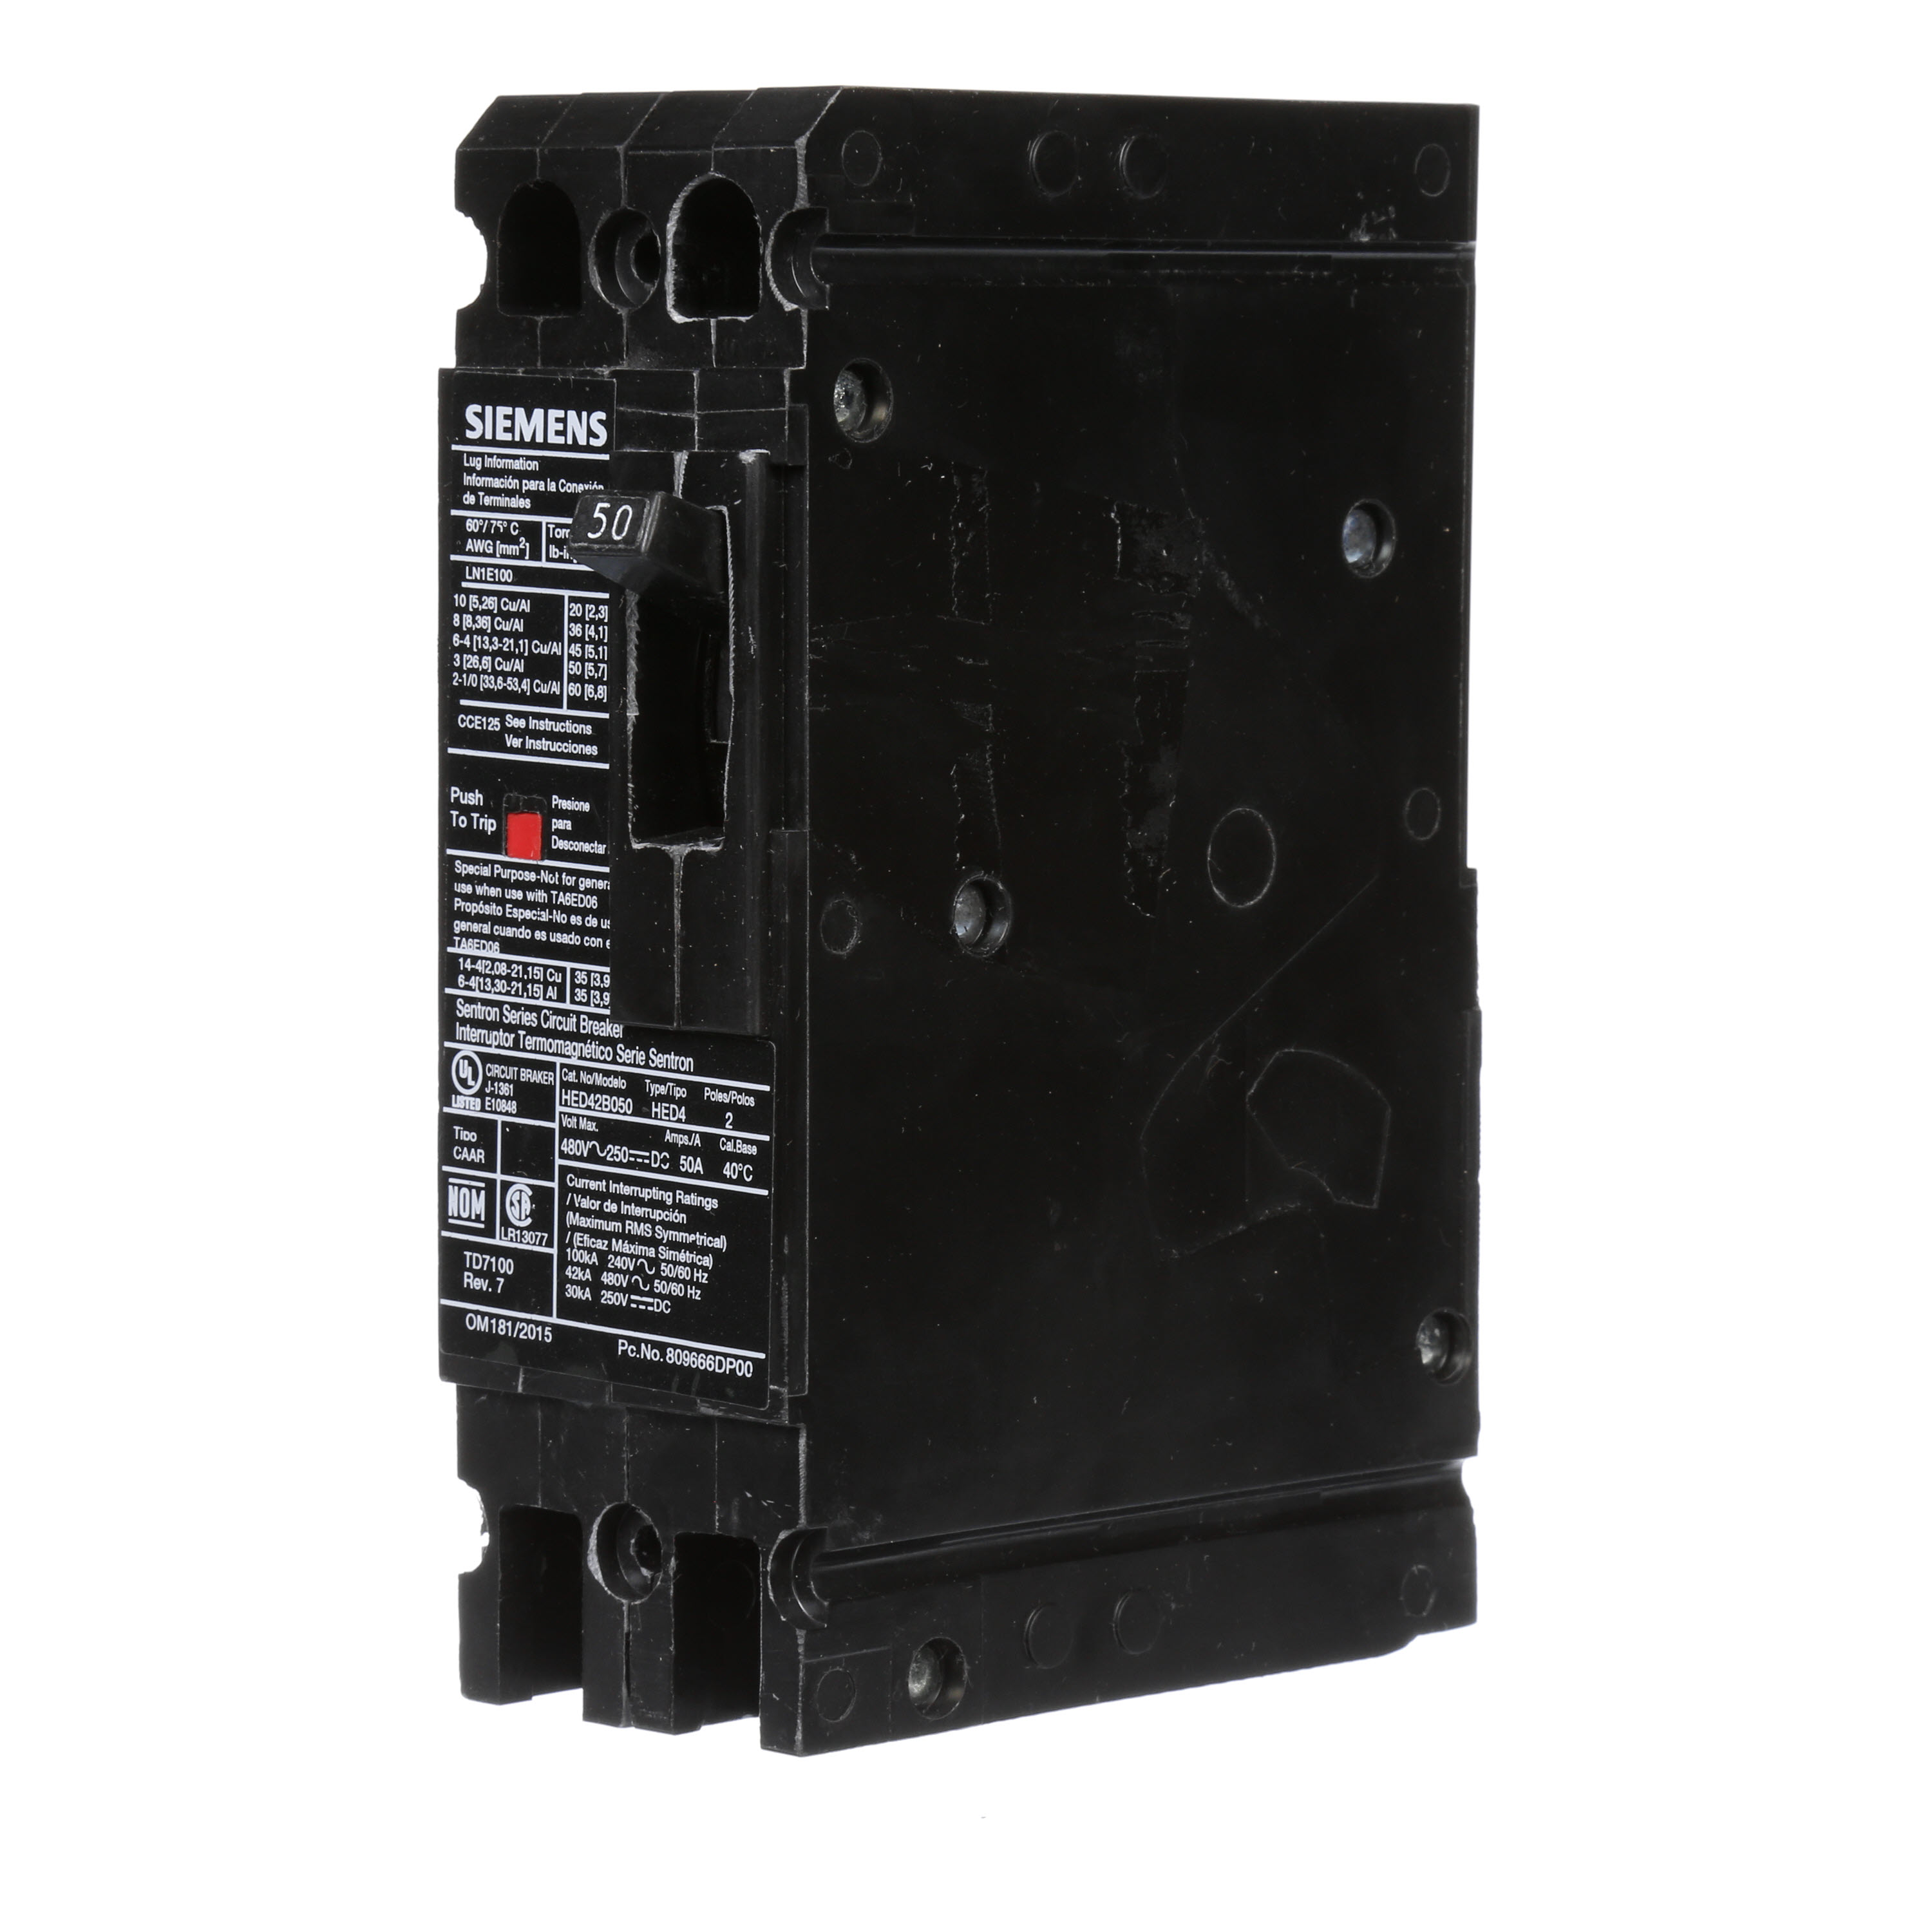 SIEMENS LOW VOLTAGE SENTRON MOLDED CASE CIRCUIT BREAKER WITH THERMAL - MAGNETICTRIP UNIT. STANDARD 40 DEG C BREAKER ED FRAME WITH HIGH BREAKING CAPACITY. 50A 2-POLE (42KAIC AT 480V). NON-INTERCHANGEABLE TRIP UNIT. SPECIAL FEATURES LOAD LUGS ONLY (LN1E100) WIRE RANGE 10 - 1/0AWG (CU/AL). DIMENSIONS (W x H x D) IN 2.00x 6.4 x 3.92.